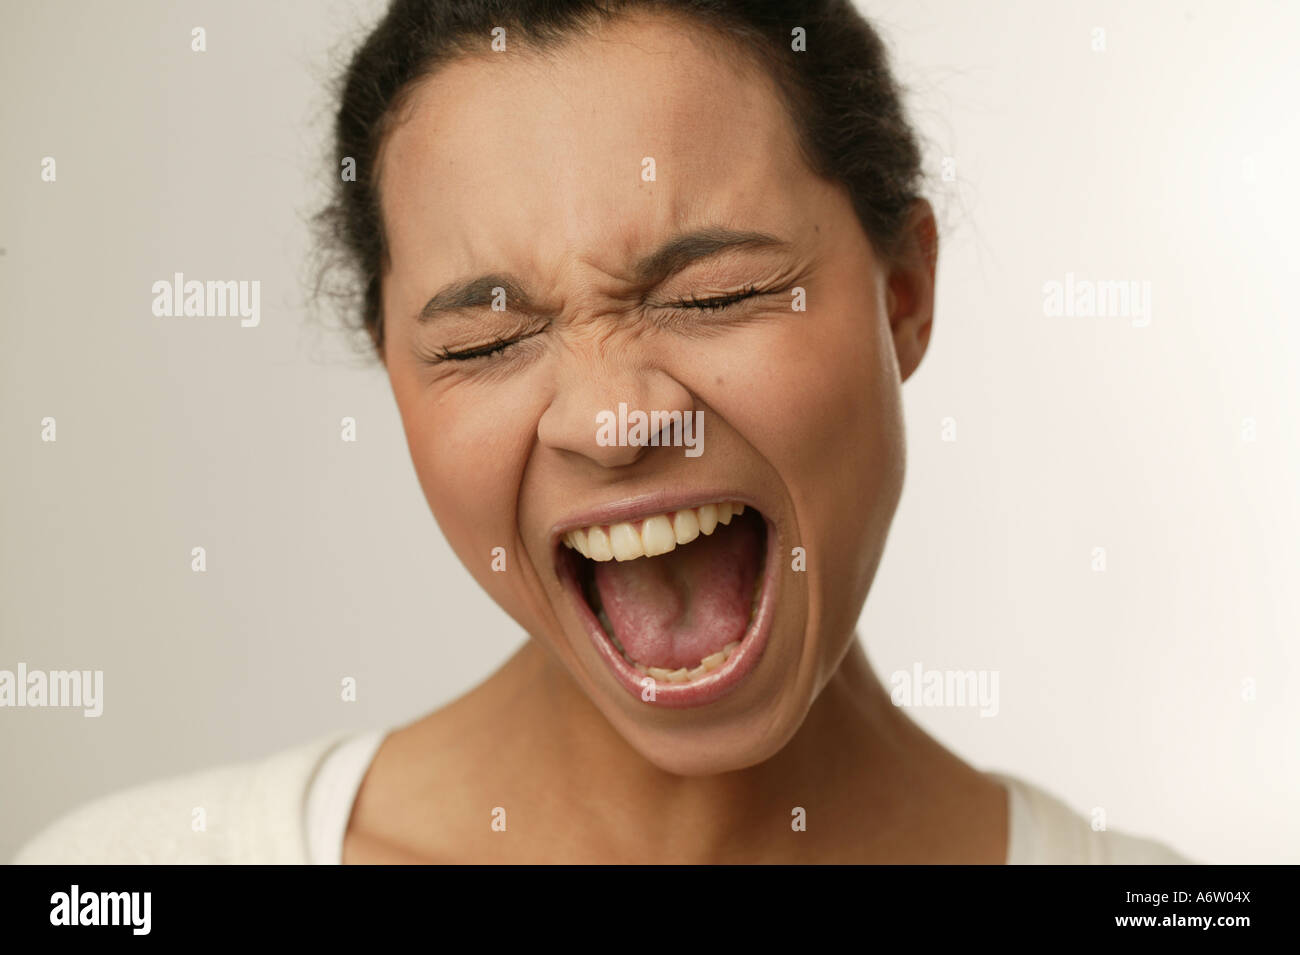 Screaming young girl Stock Photo